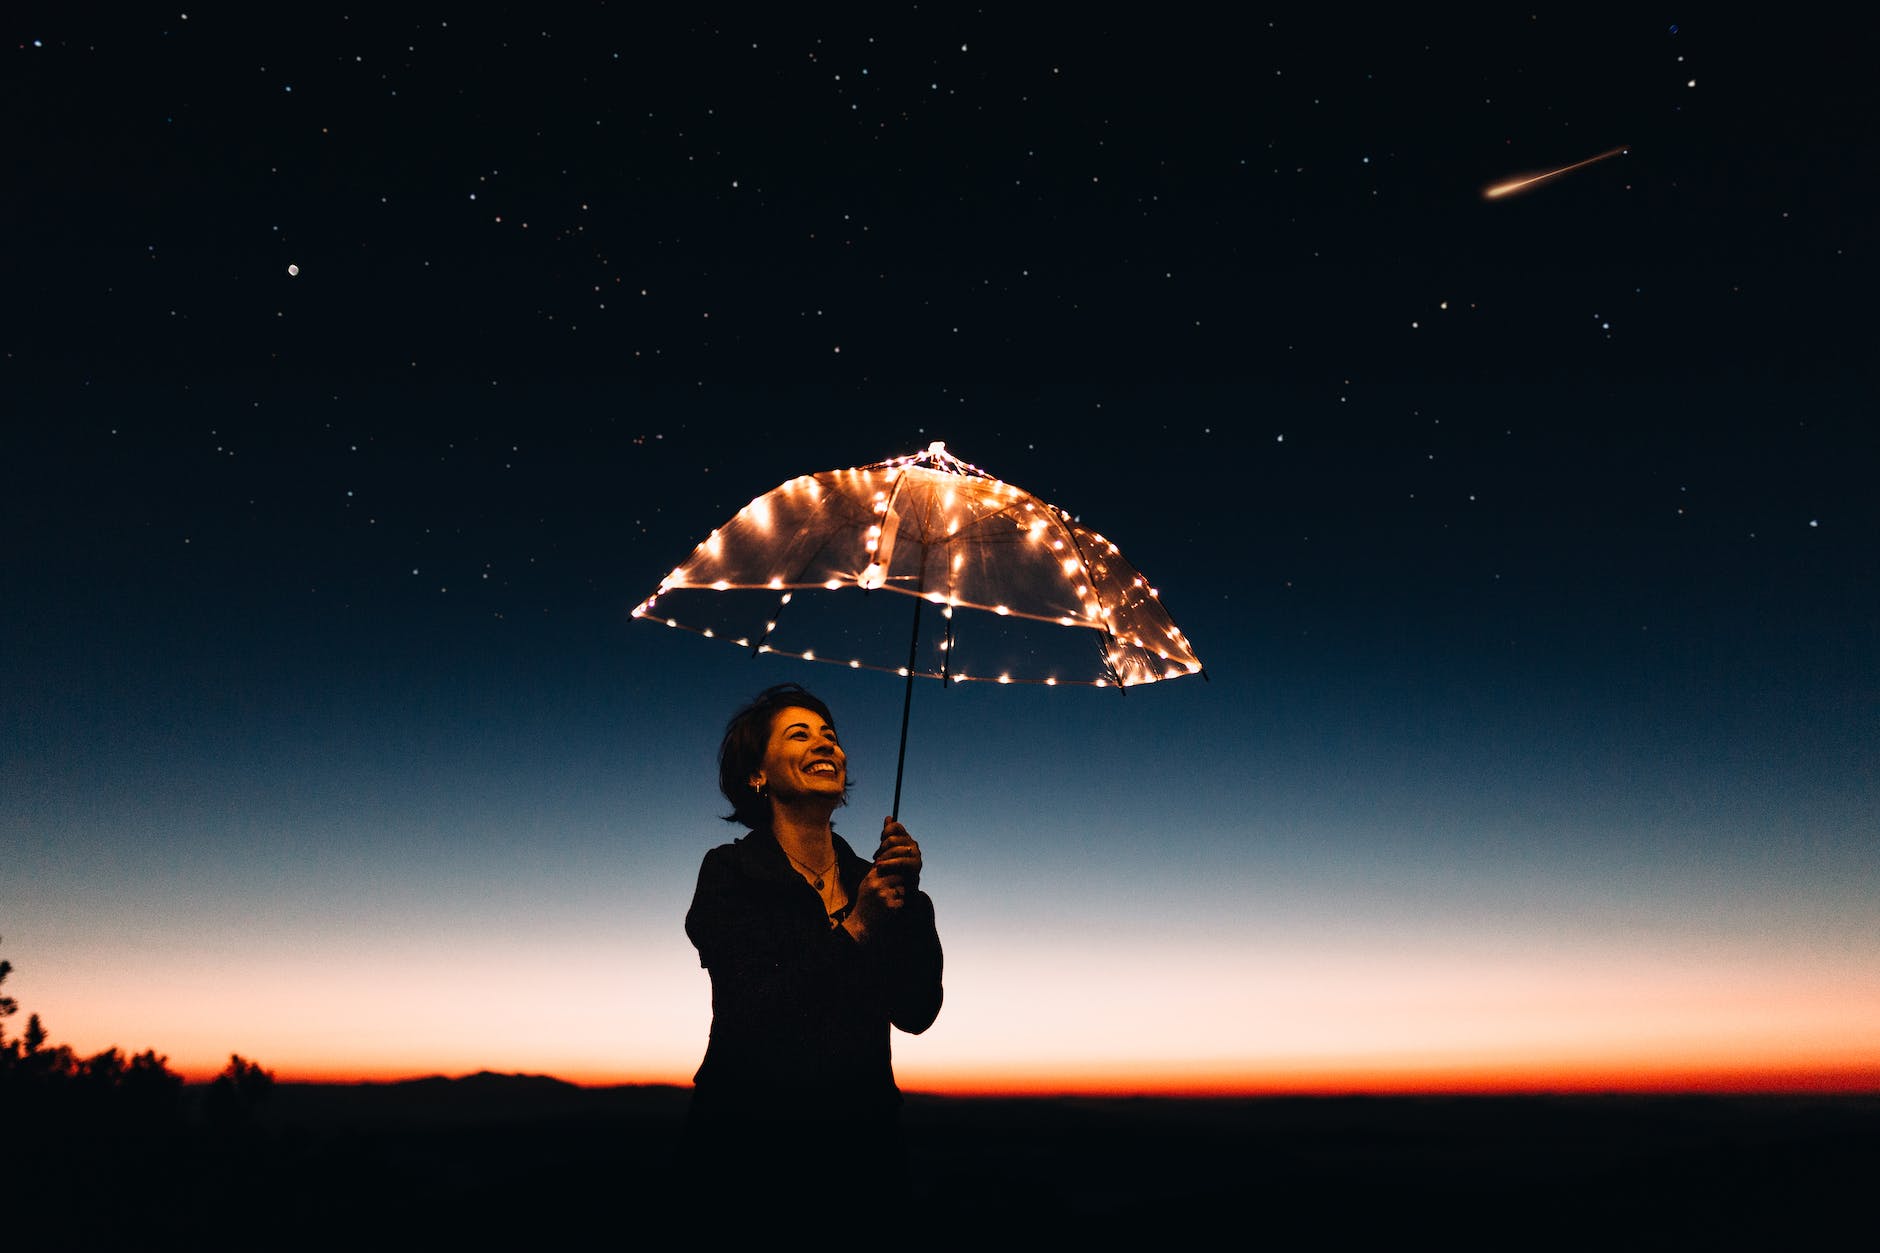 woman using umbrella with lights, symbolizing the journey of leaving the comfort zone.